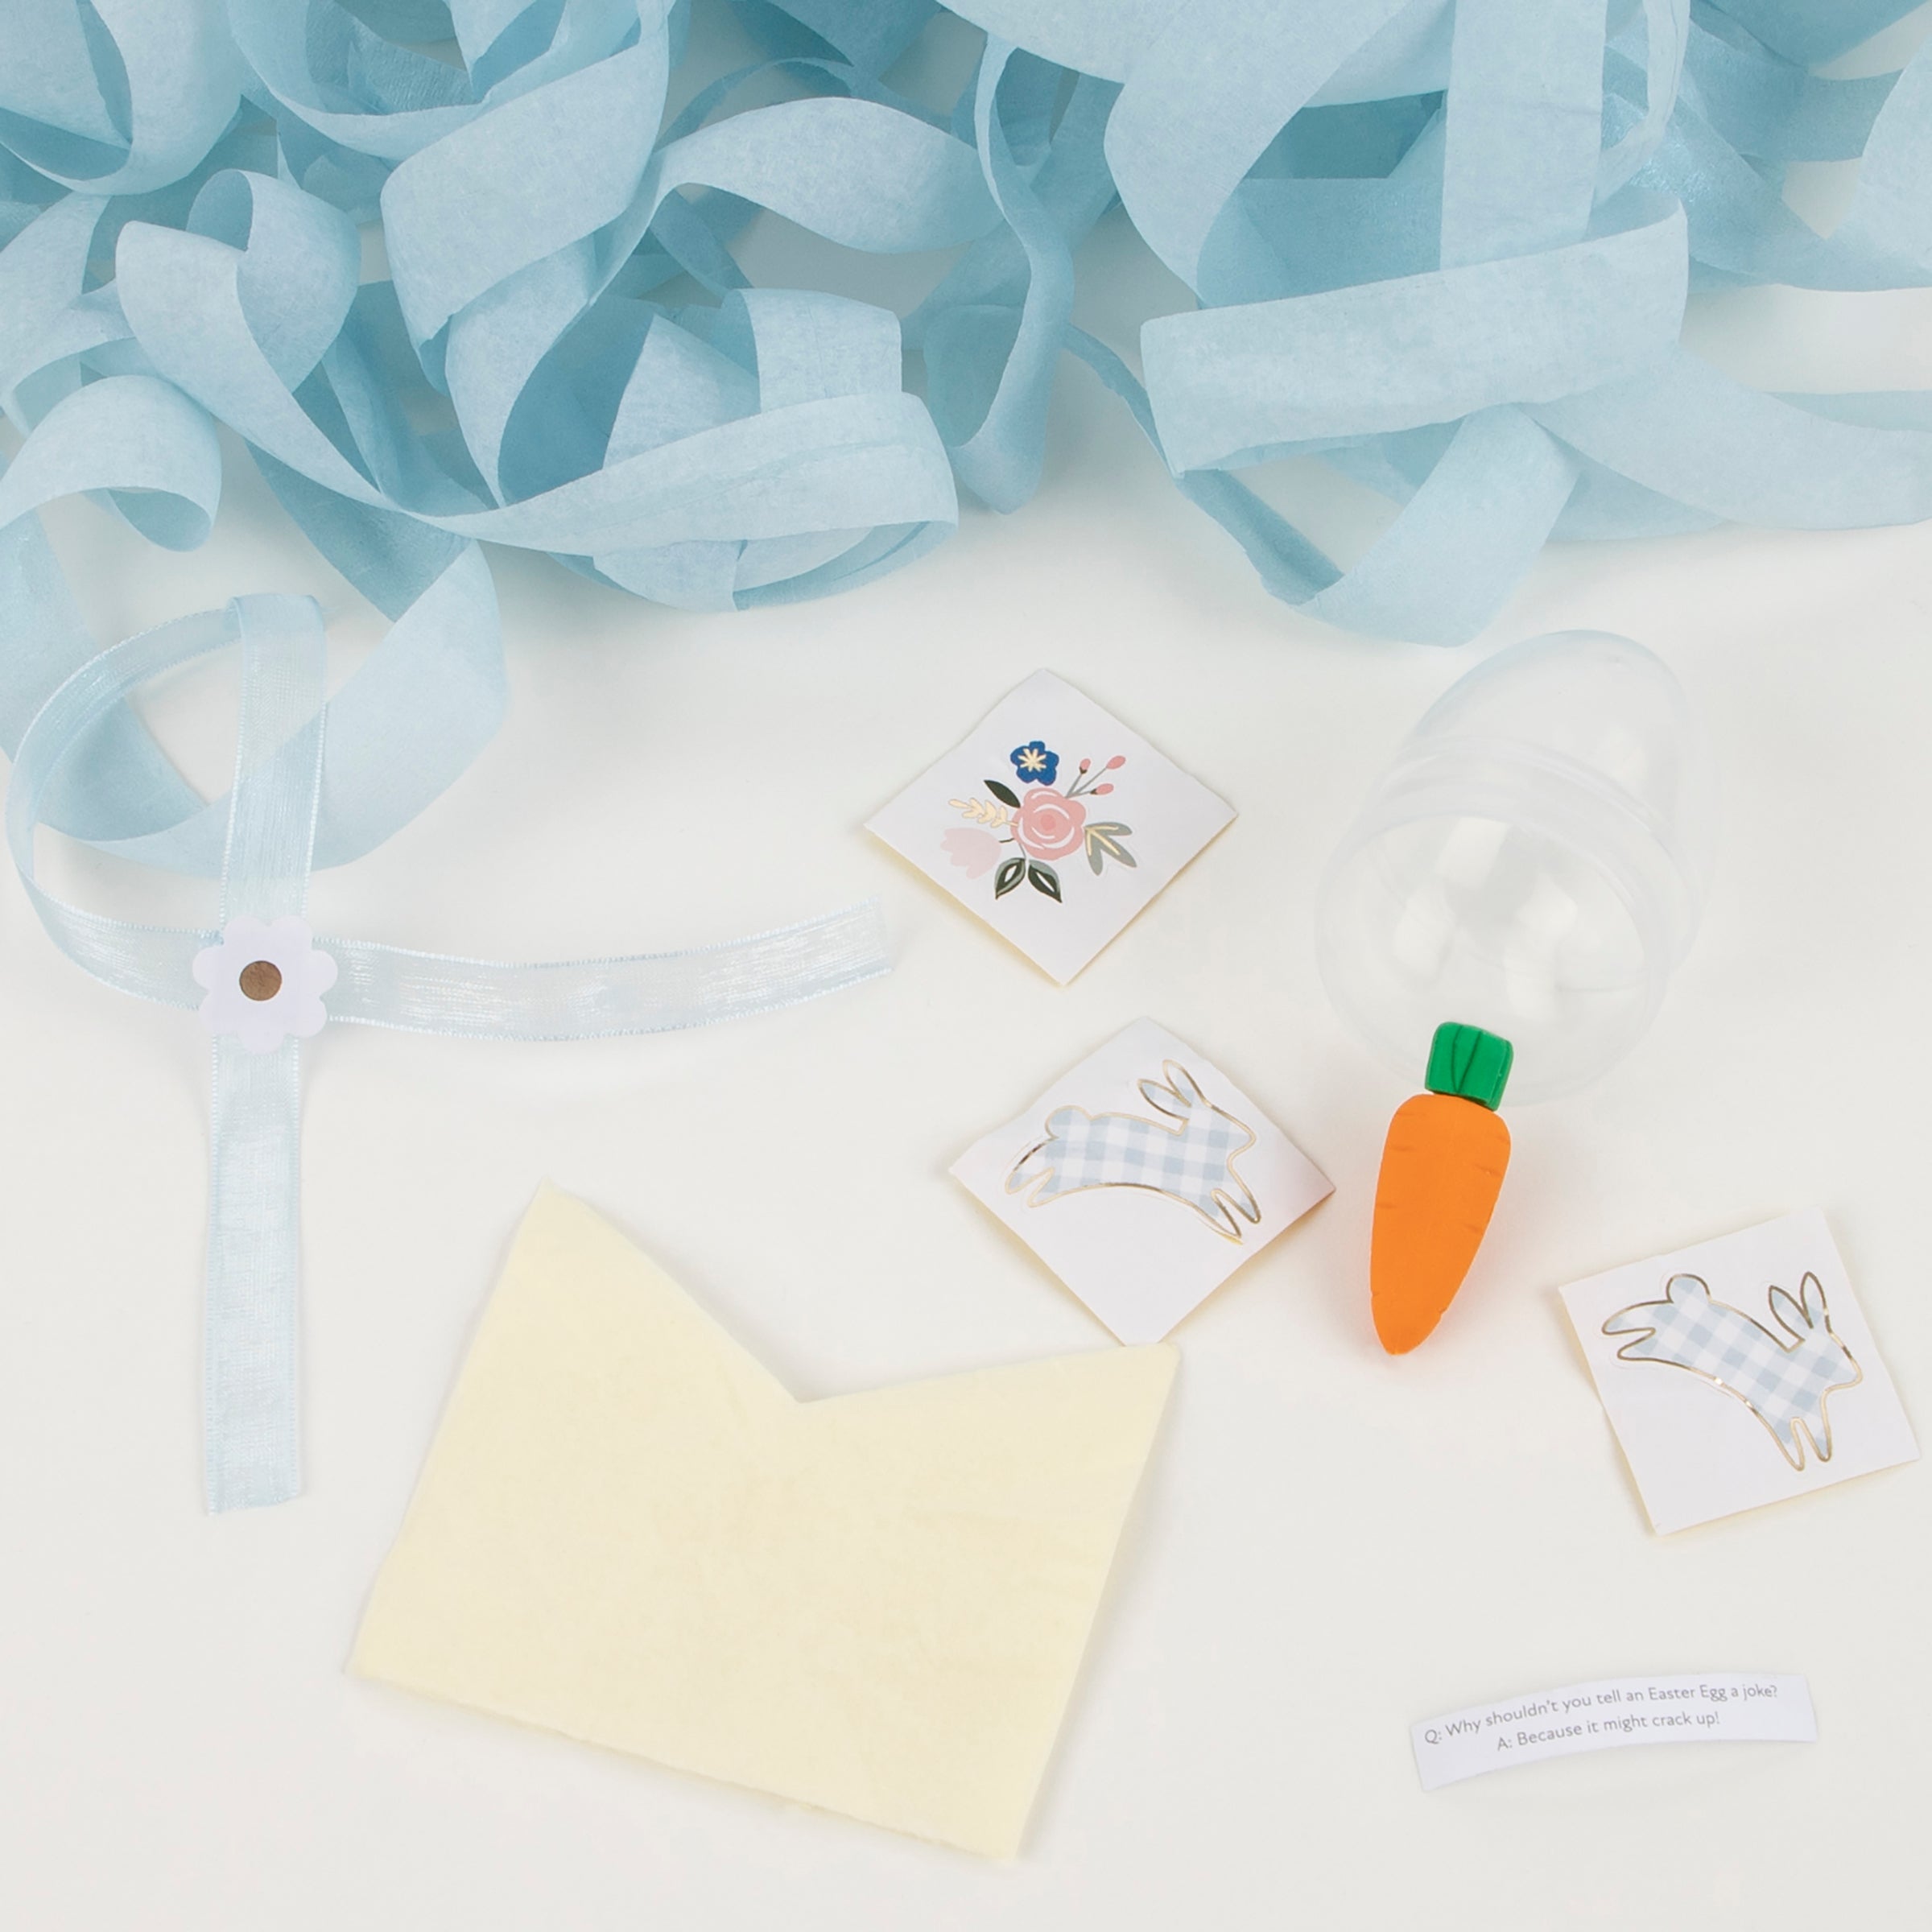 Our plastic Easter eggs are filled with Easter treats including a party hat, foiled stickers and a carrot shaped eraser.